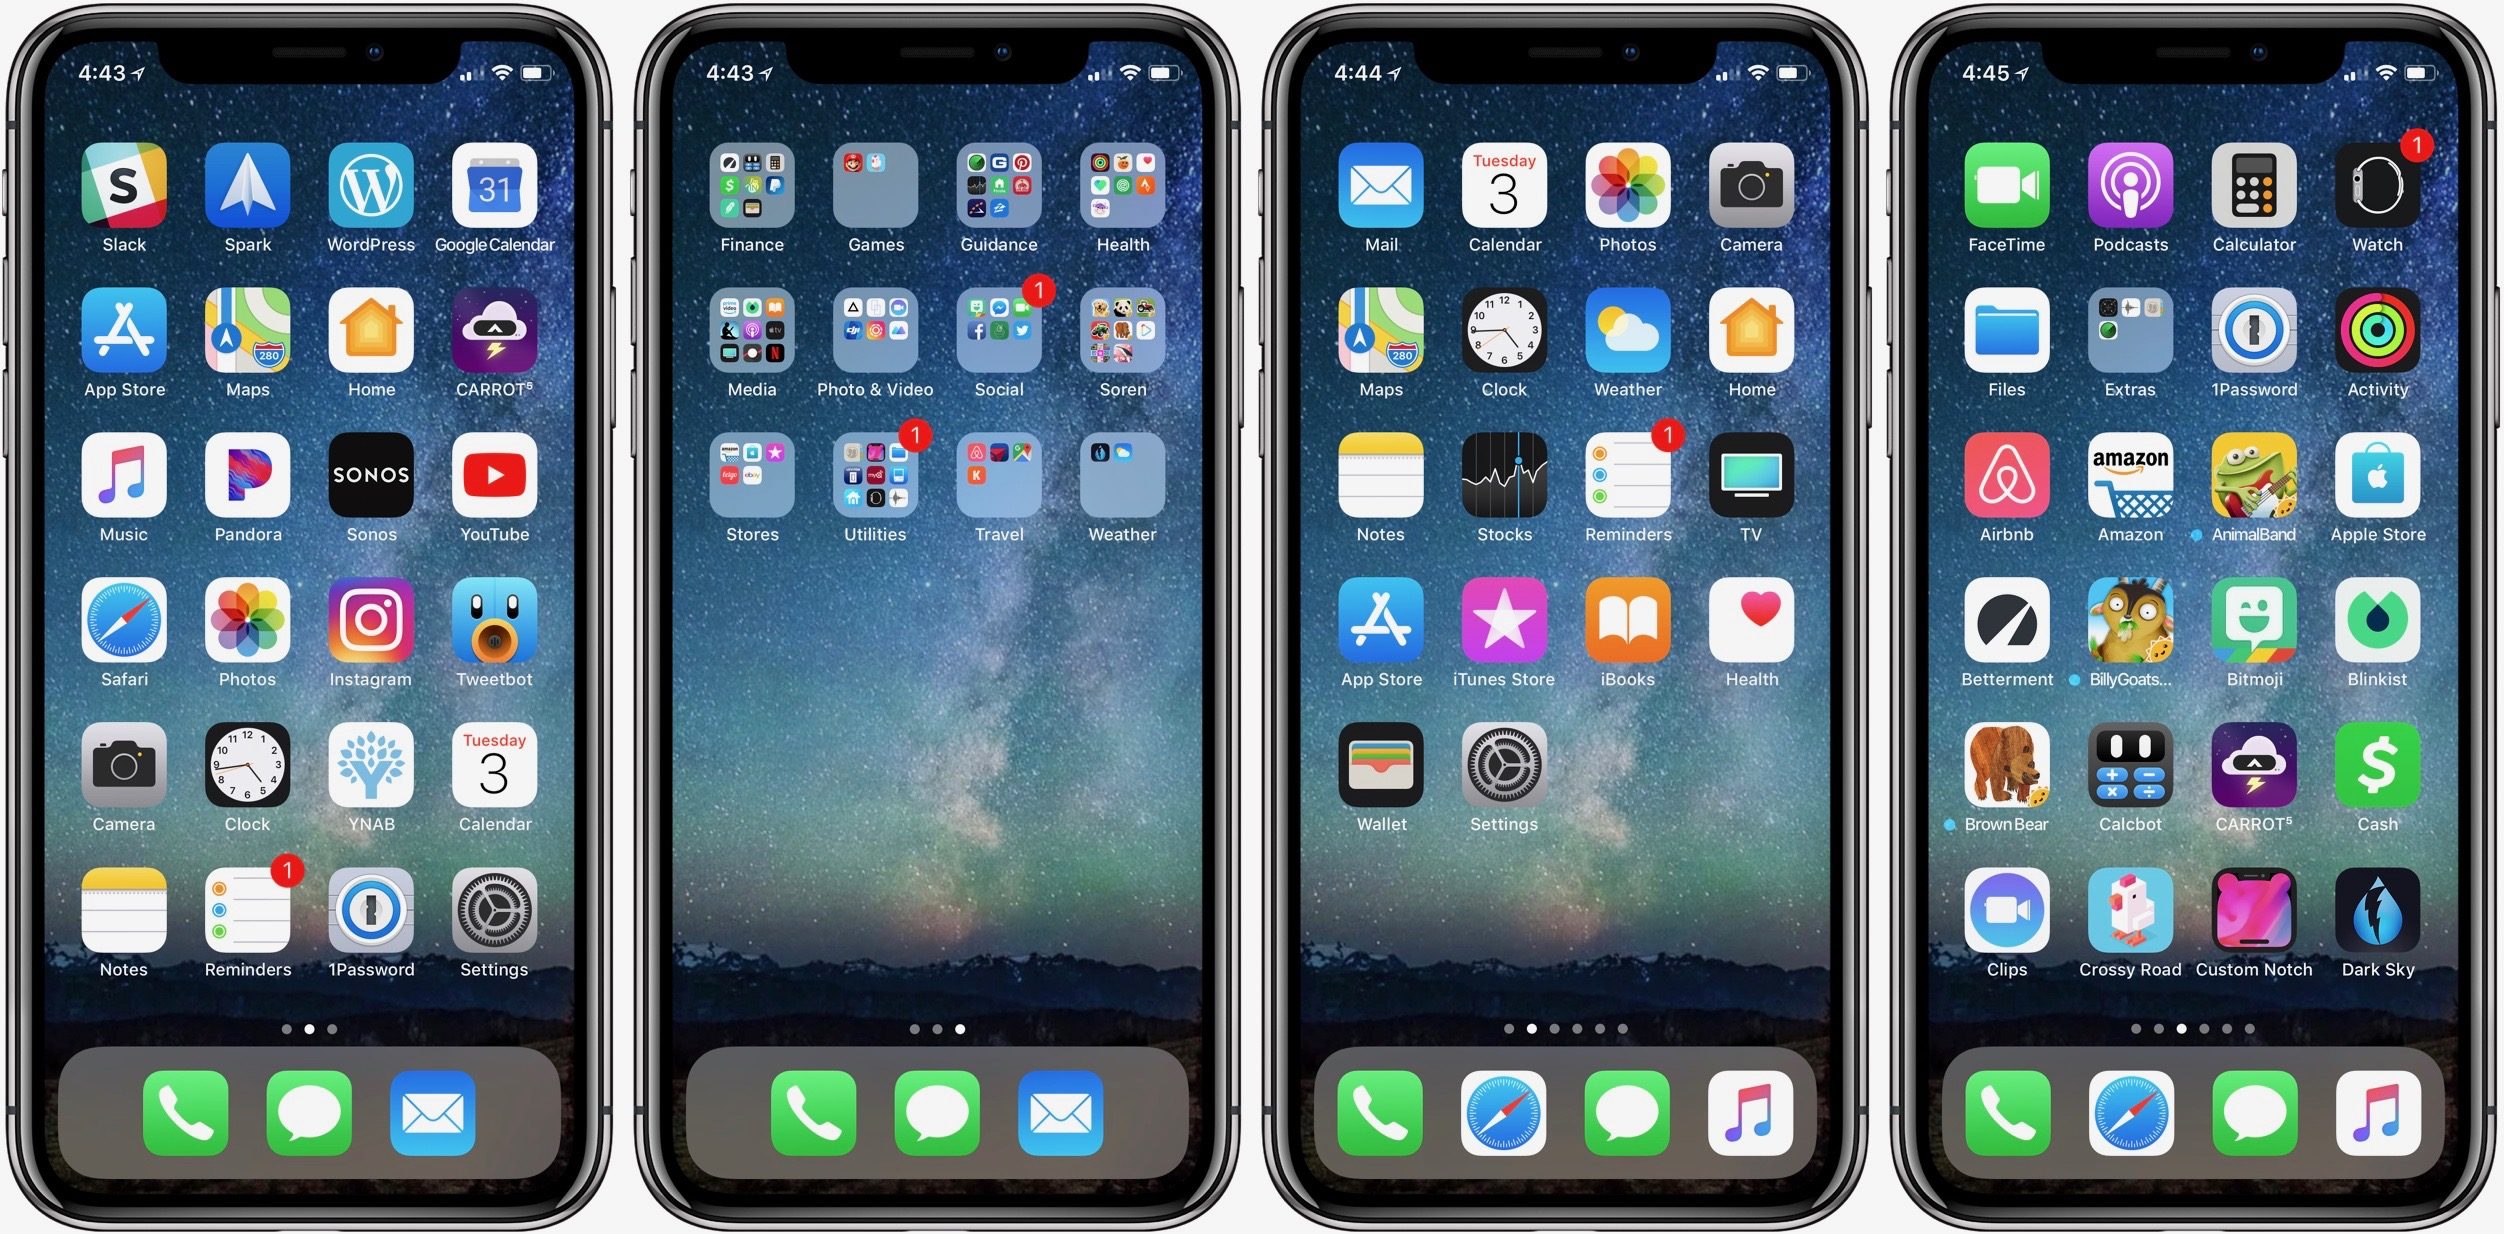 How to Restore the Default Home Screen Layout on iOS?